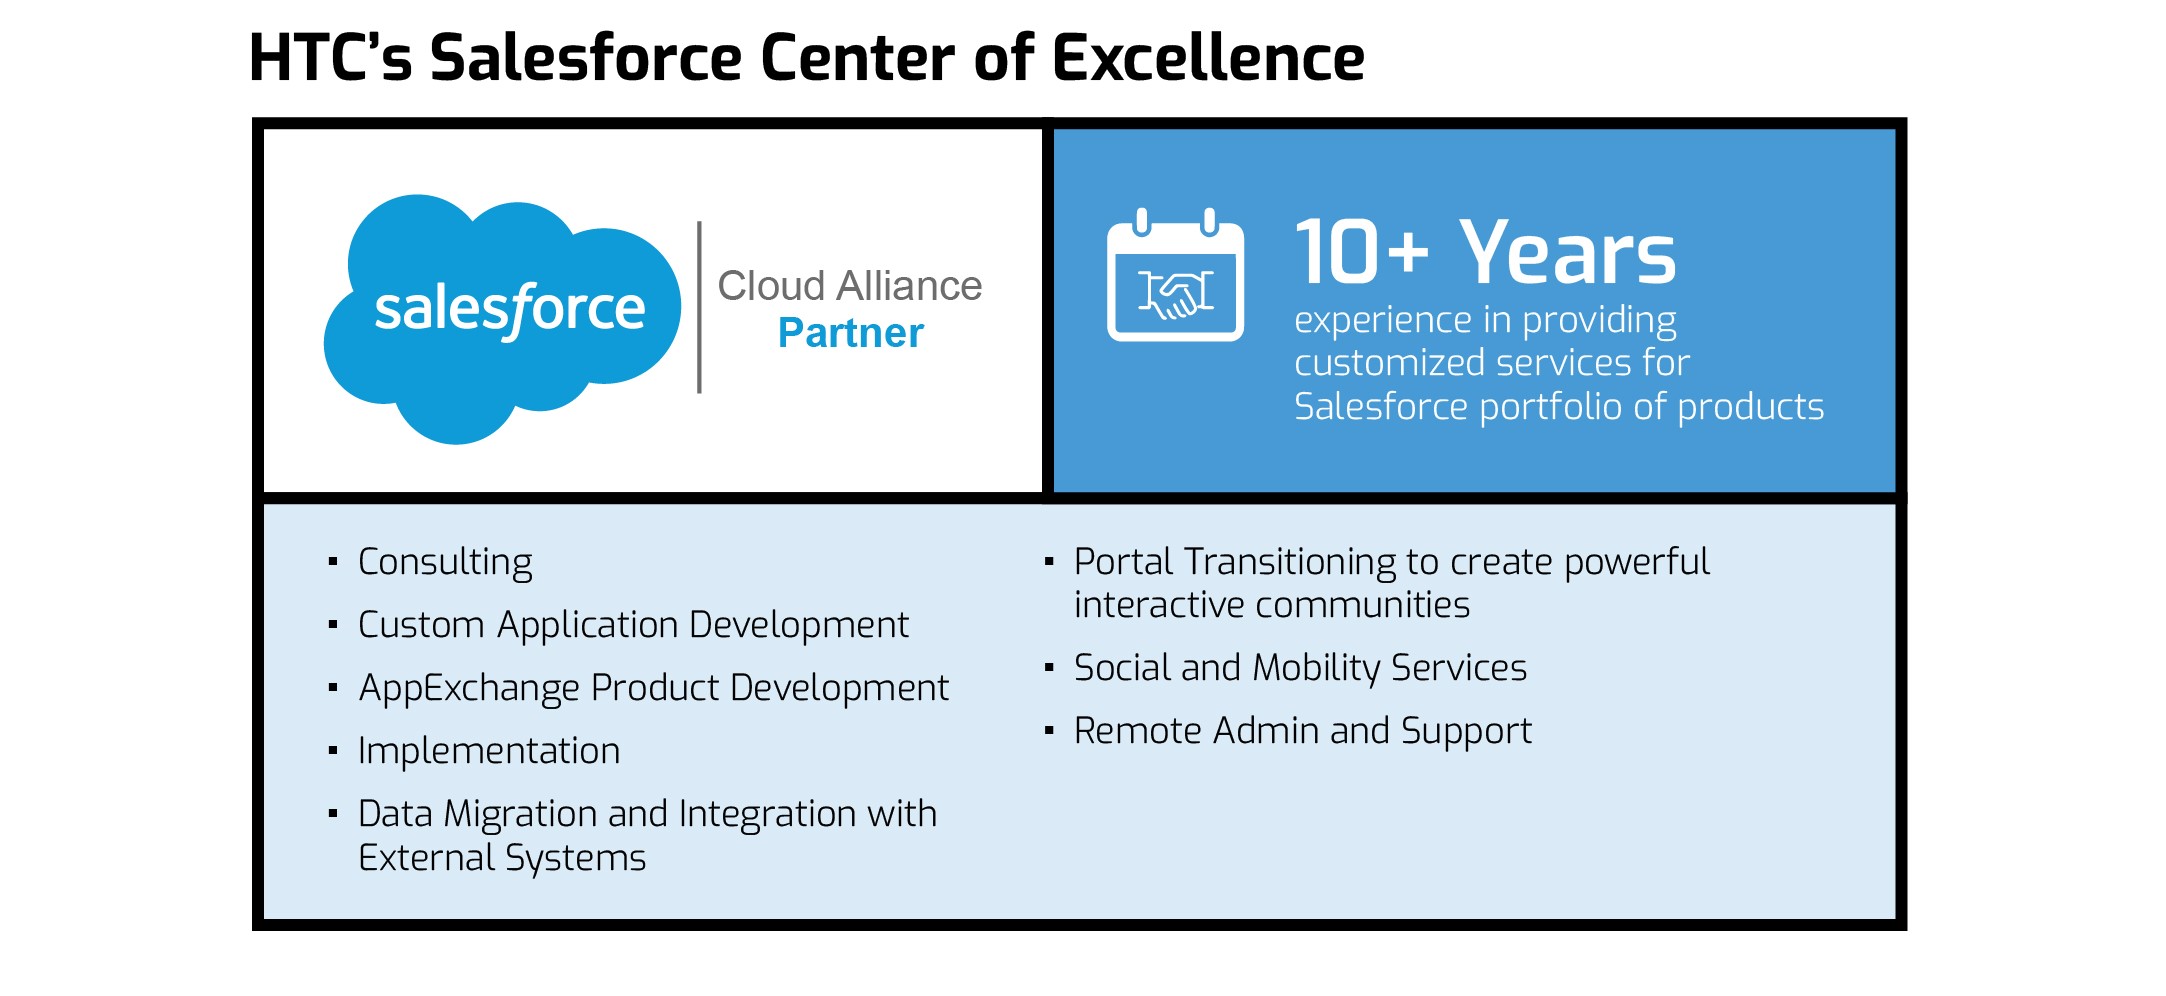 HTC's Salesforce Center of Excellence